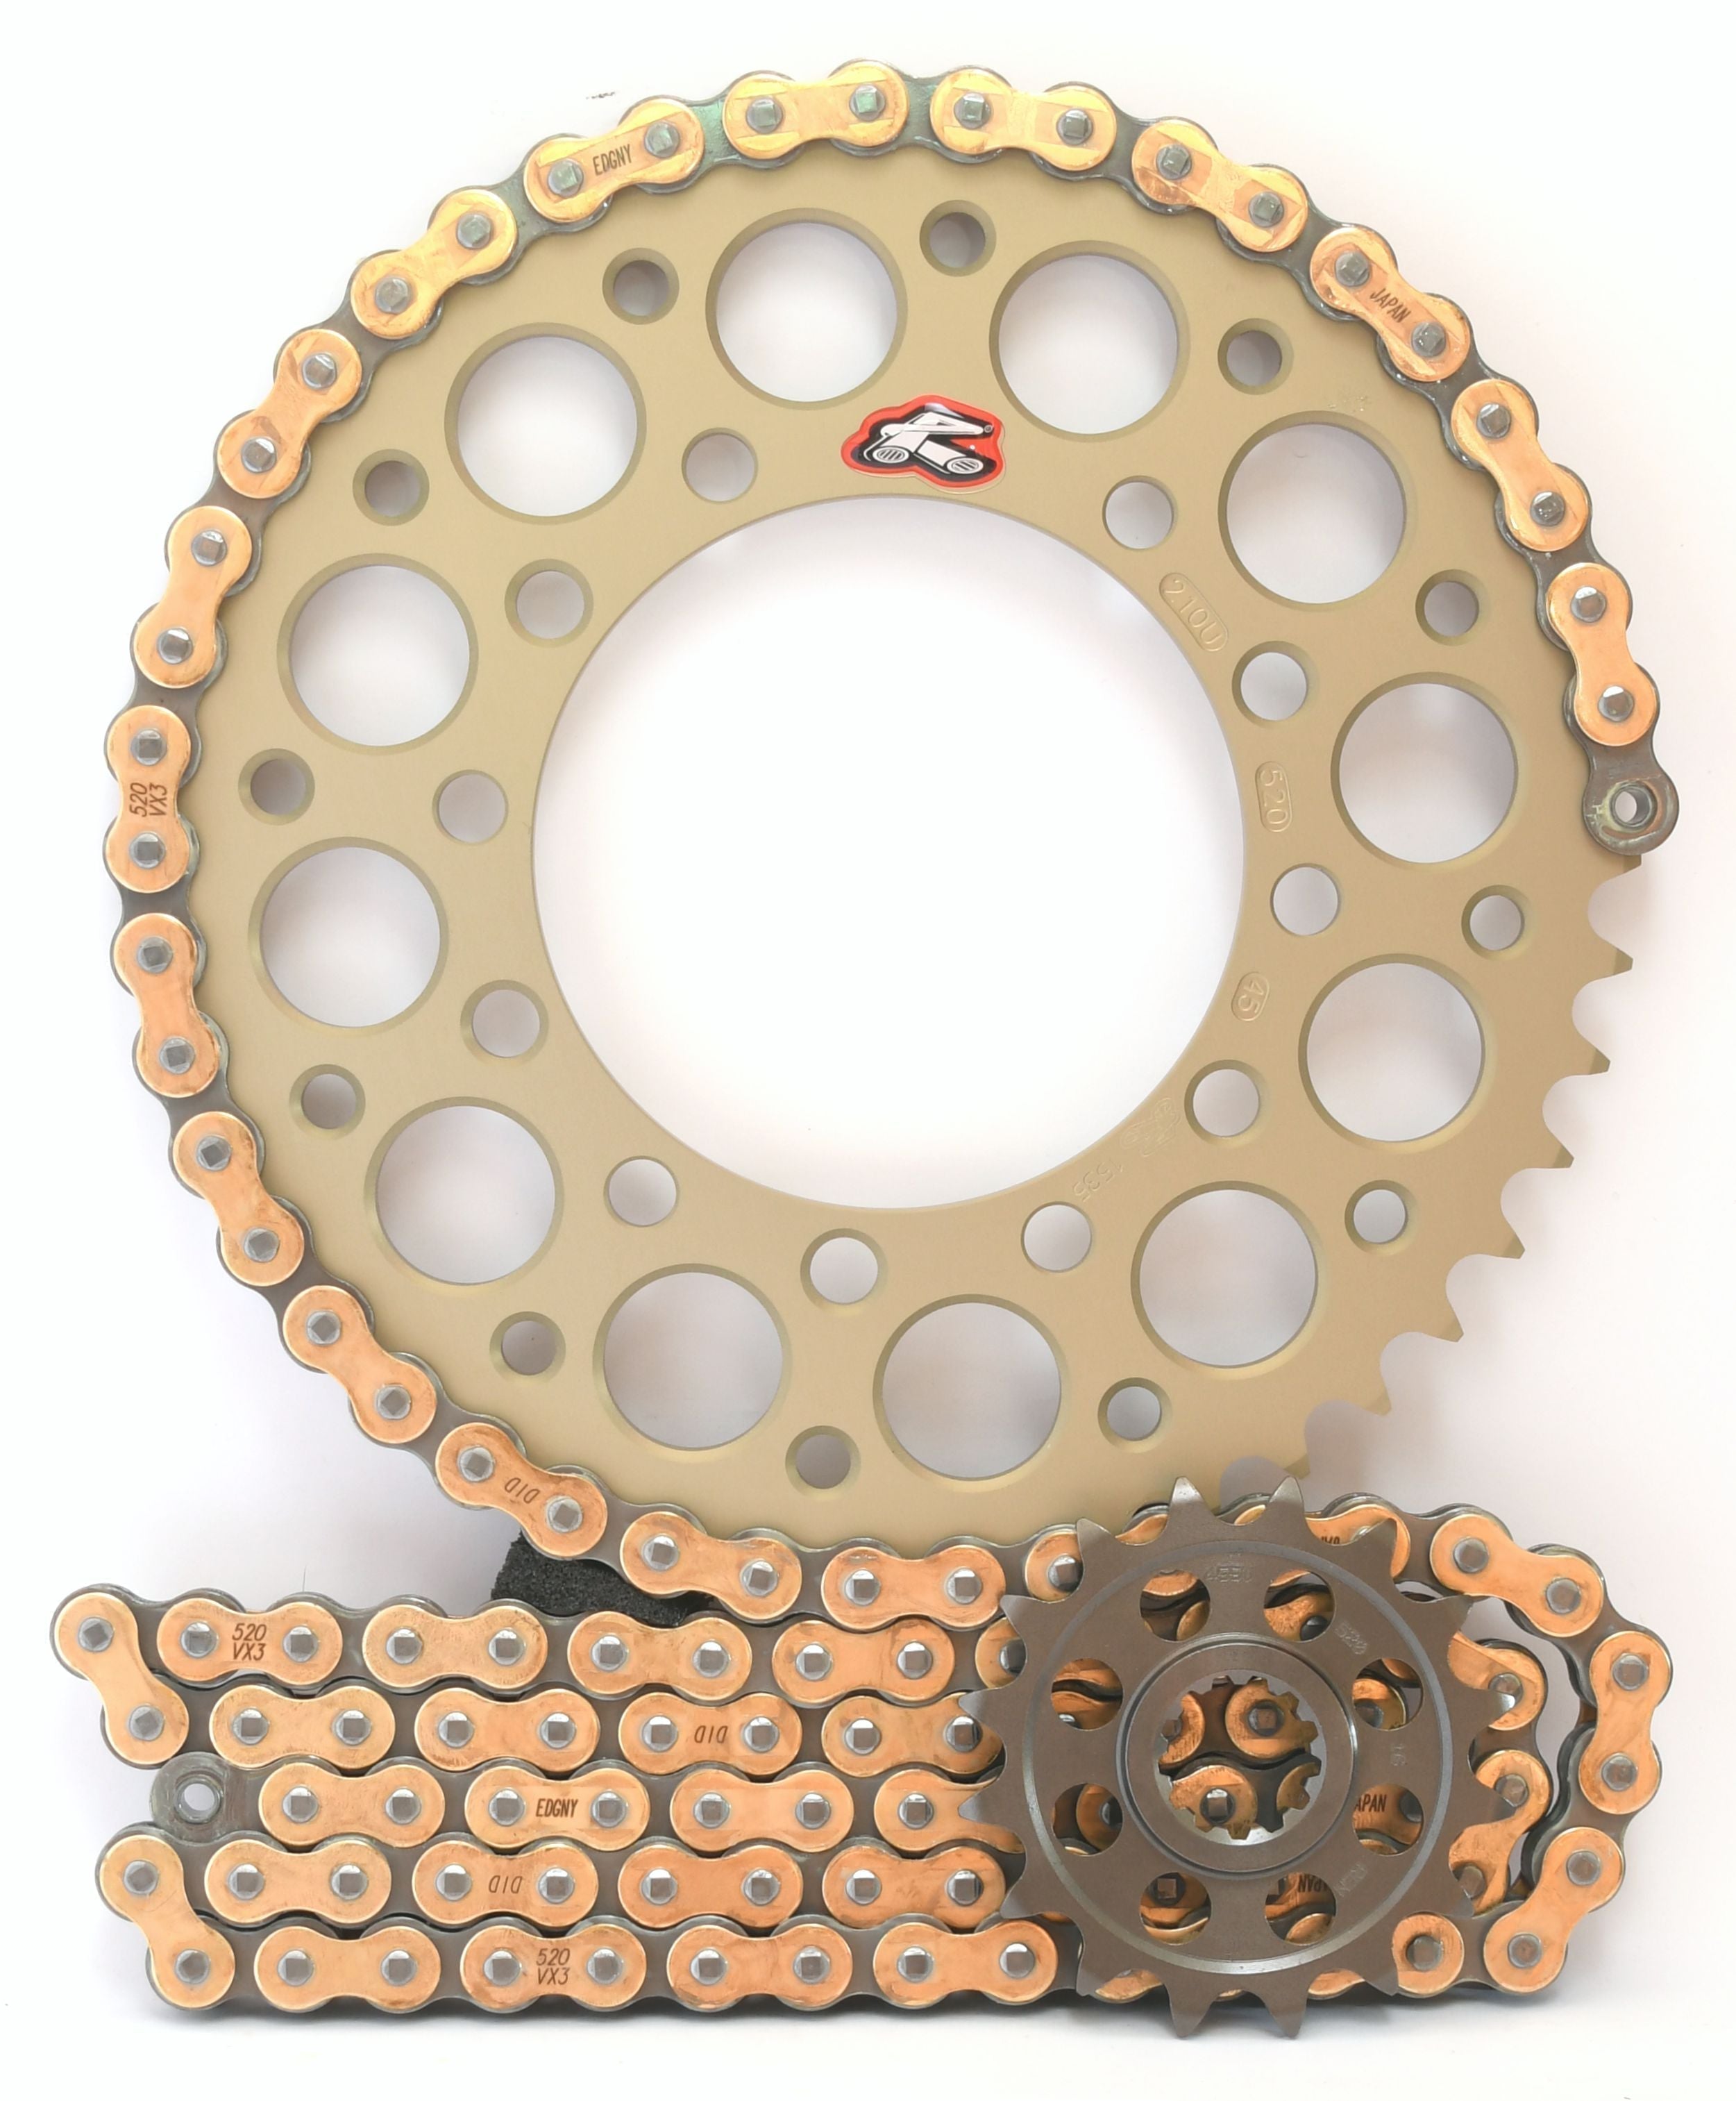 Renthal Ultralight and DID 520 Conversion Chain & Sprocket Kit for Kawasaki ZX10R 2016-2020 - Standard Gearing